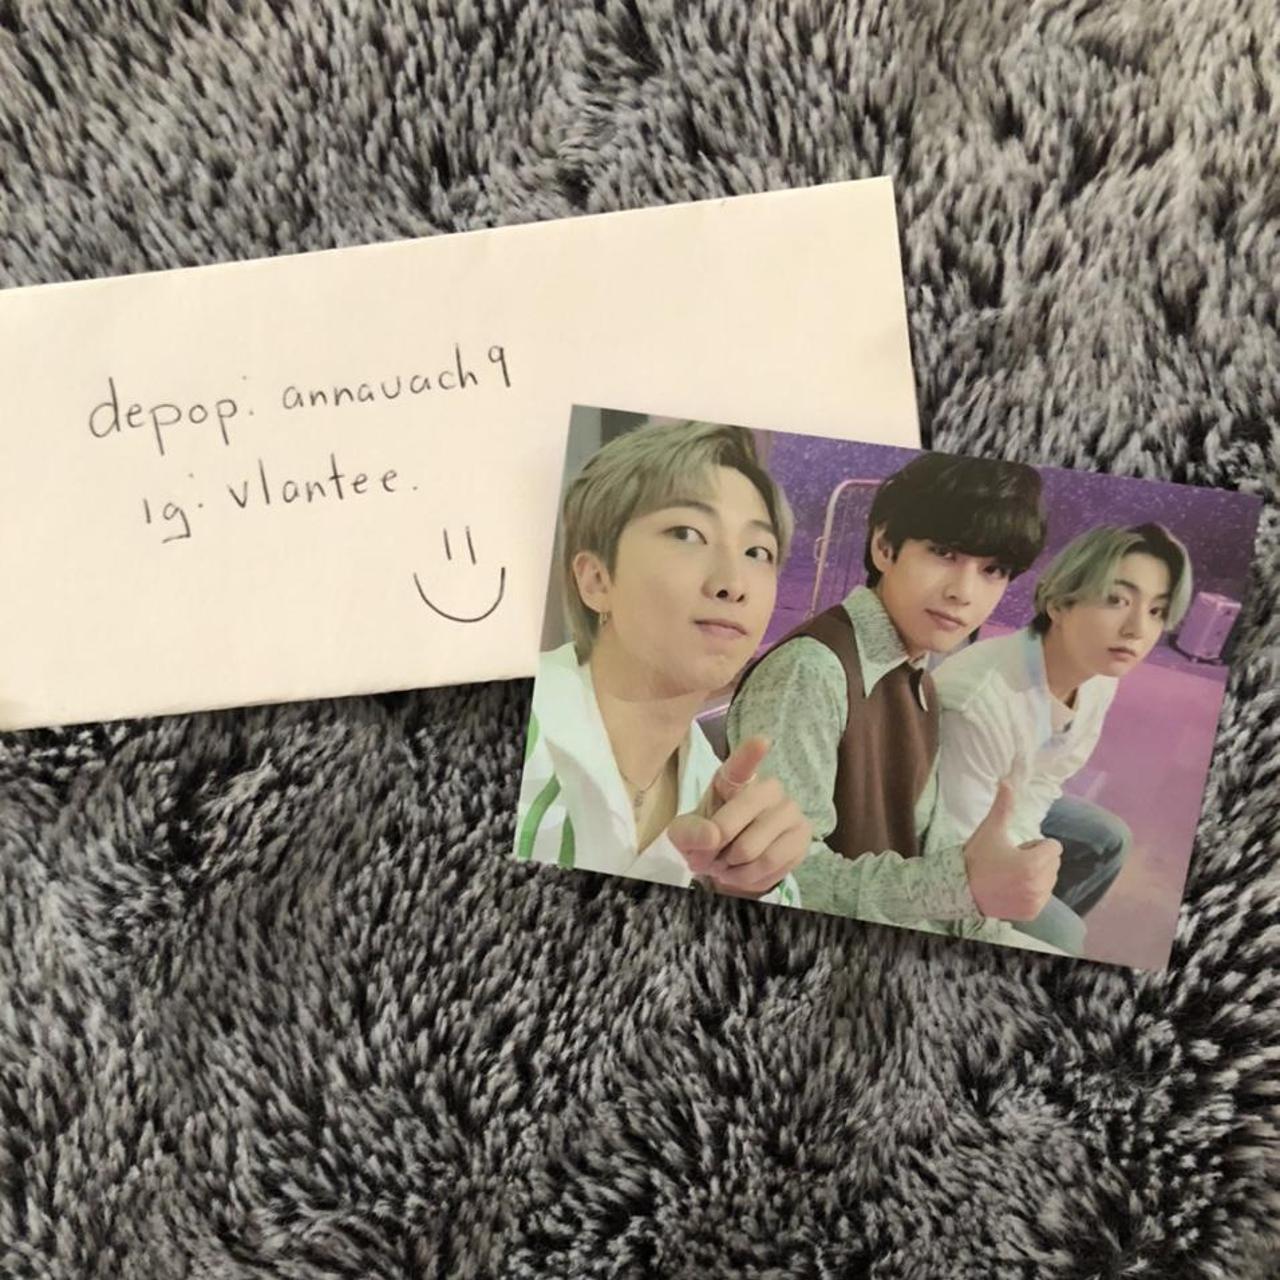 Product Image 1 - BTS SOWOOZOO PHOTOCARD RM/TAEHYUNG/JUNGKOOK

PRICE IS